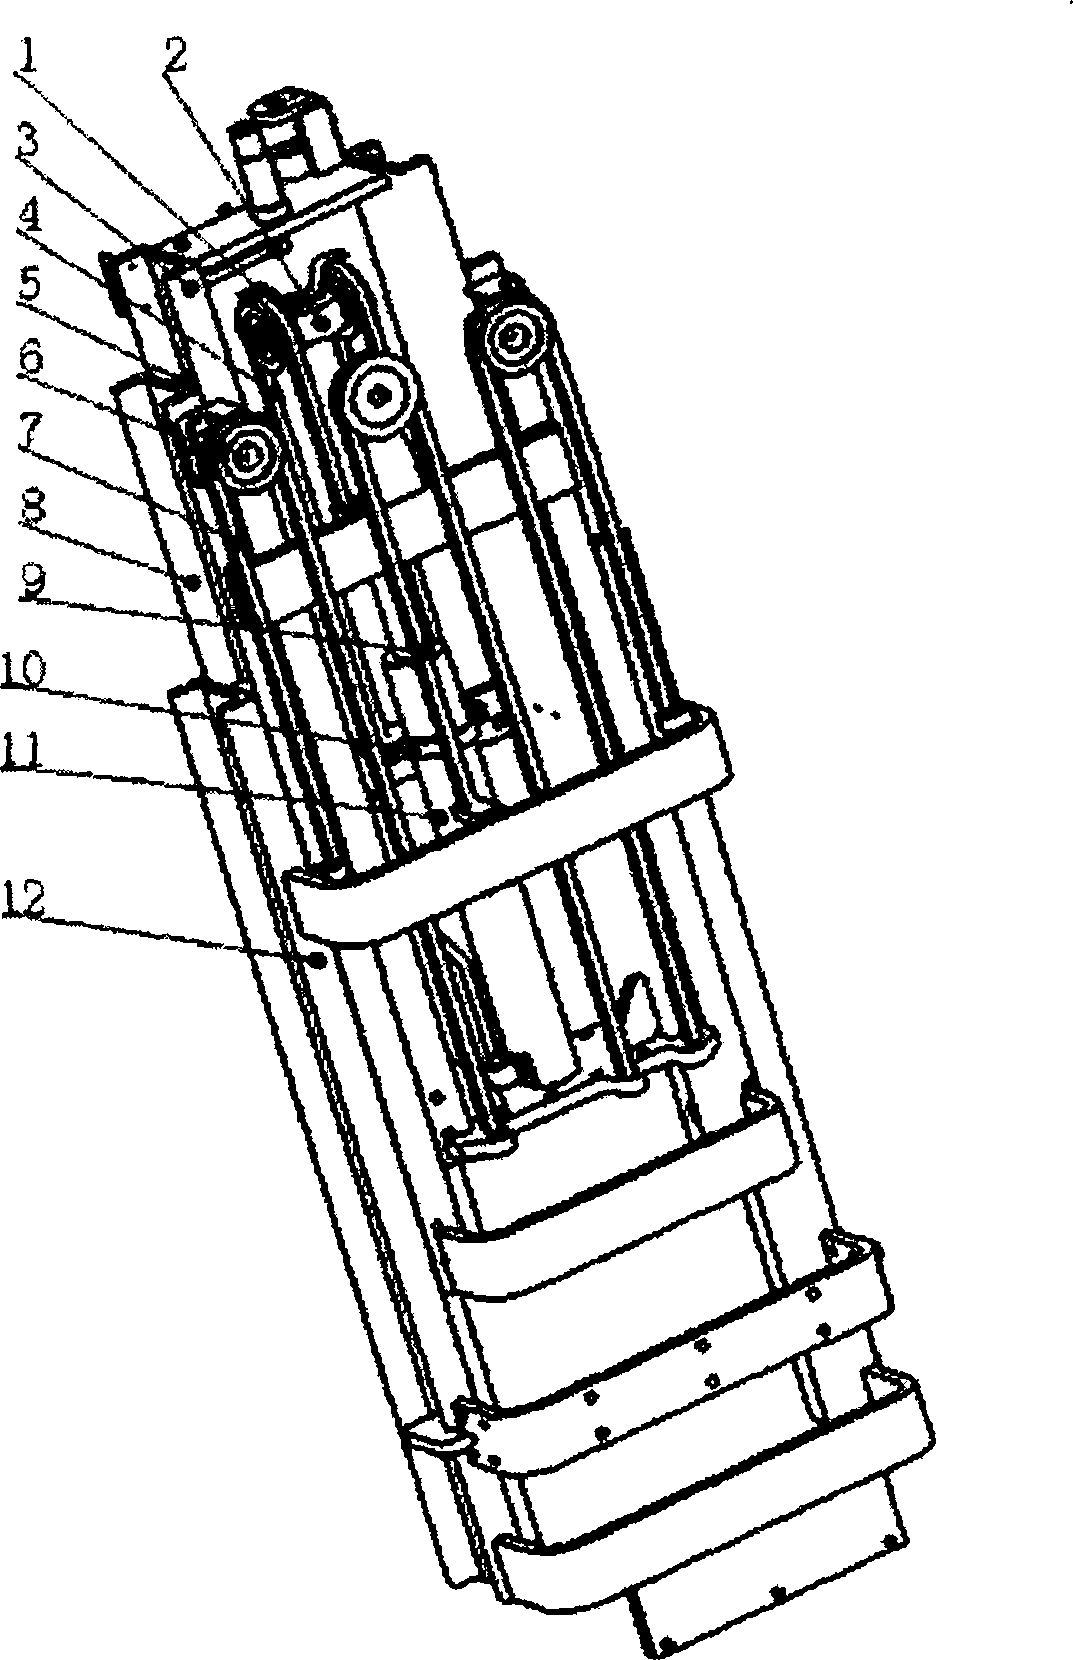 Hoisting device in three-section hoisting pattern